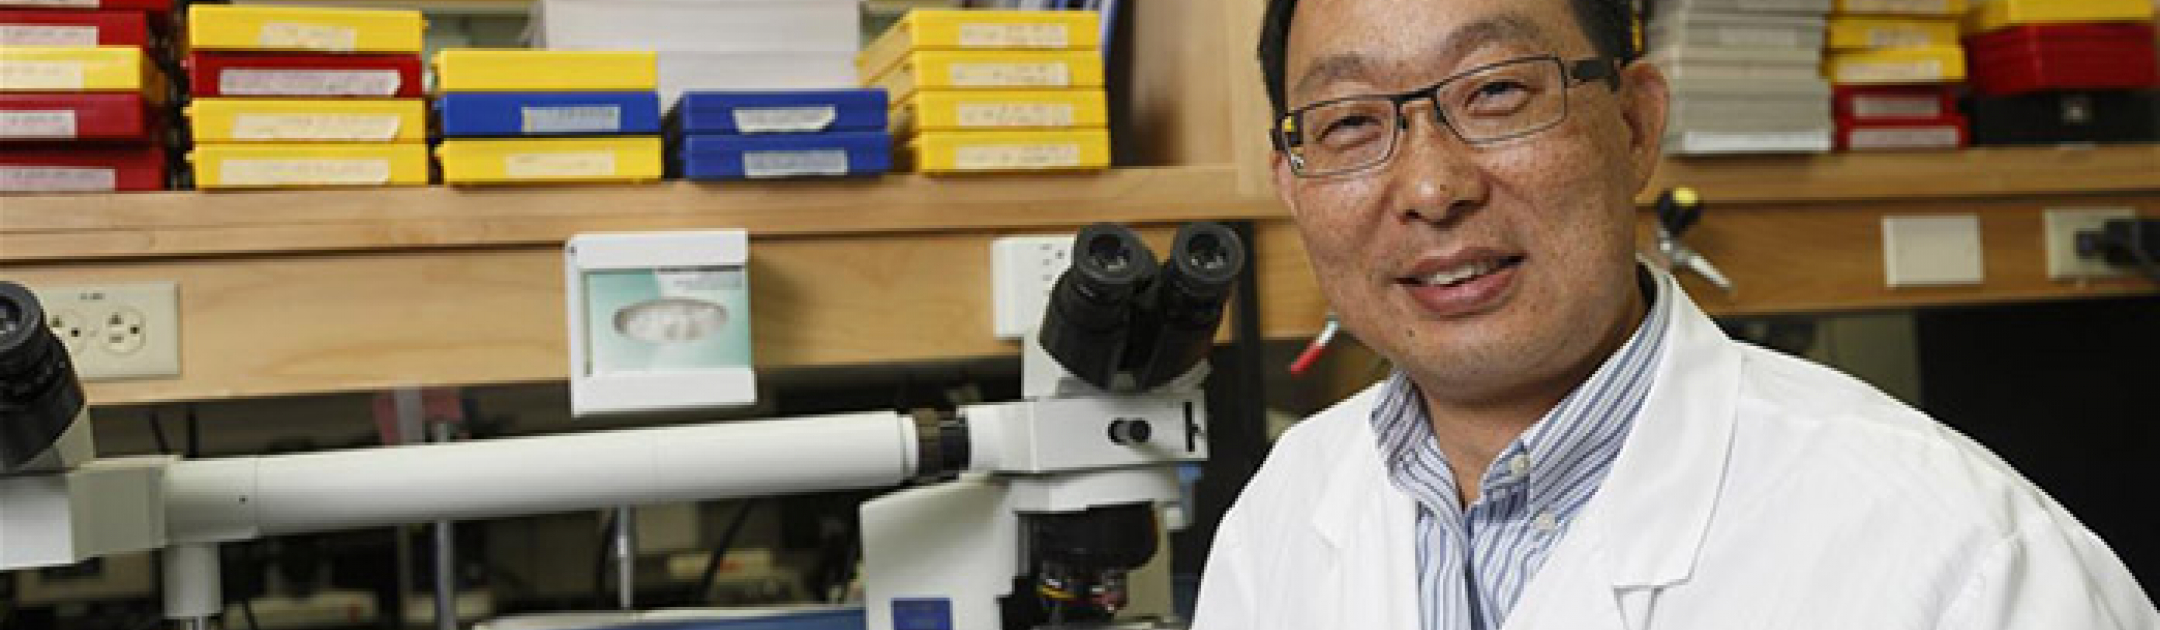 Dr. Qingping Feng at a lab bench